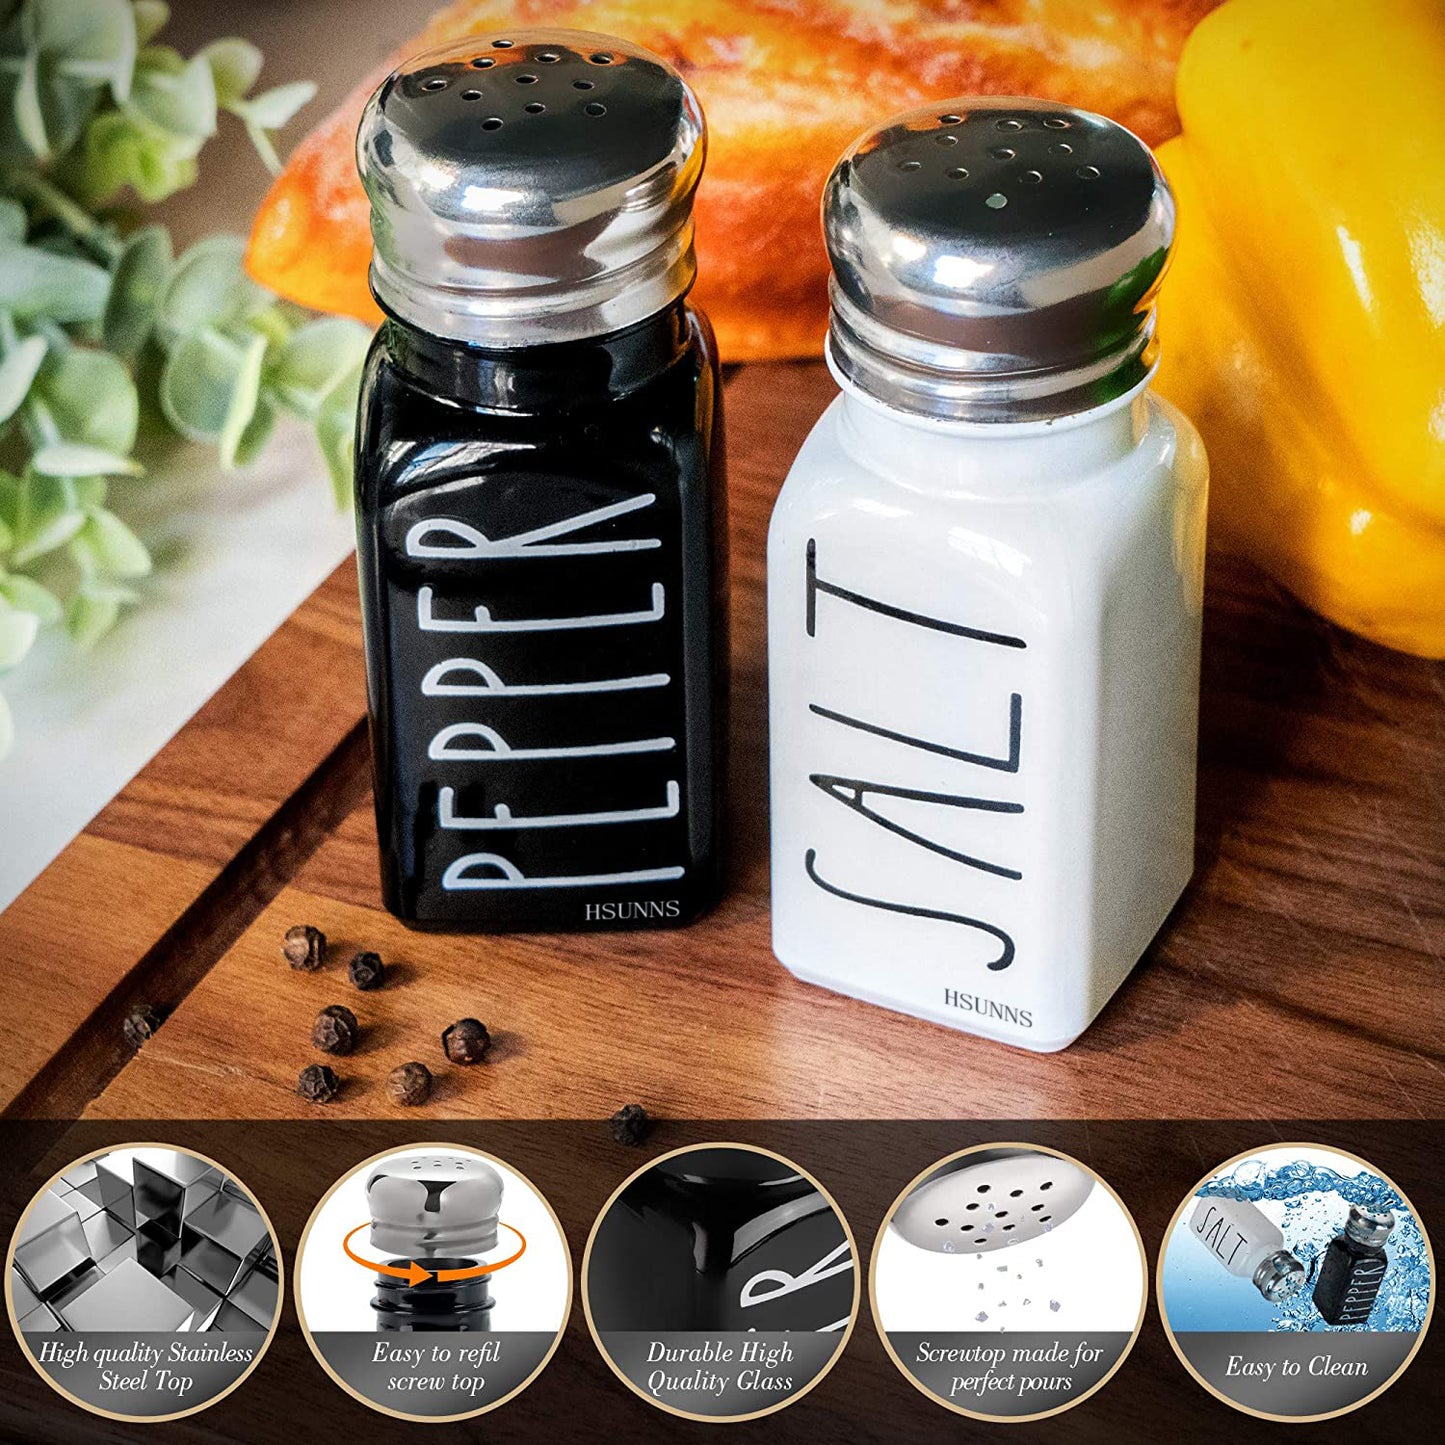 Farmhouse Salt and Pepper Shakers Set, Cute Modern Farmhouse Kitchen Decor for Home Restaurants Wedding, Gorgeous Vintage Glass Black White Shaker Sets with 4 Stainless Steel Lids